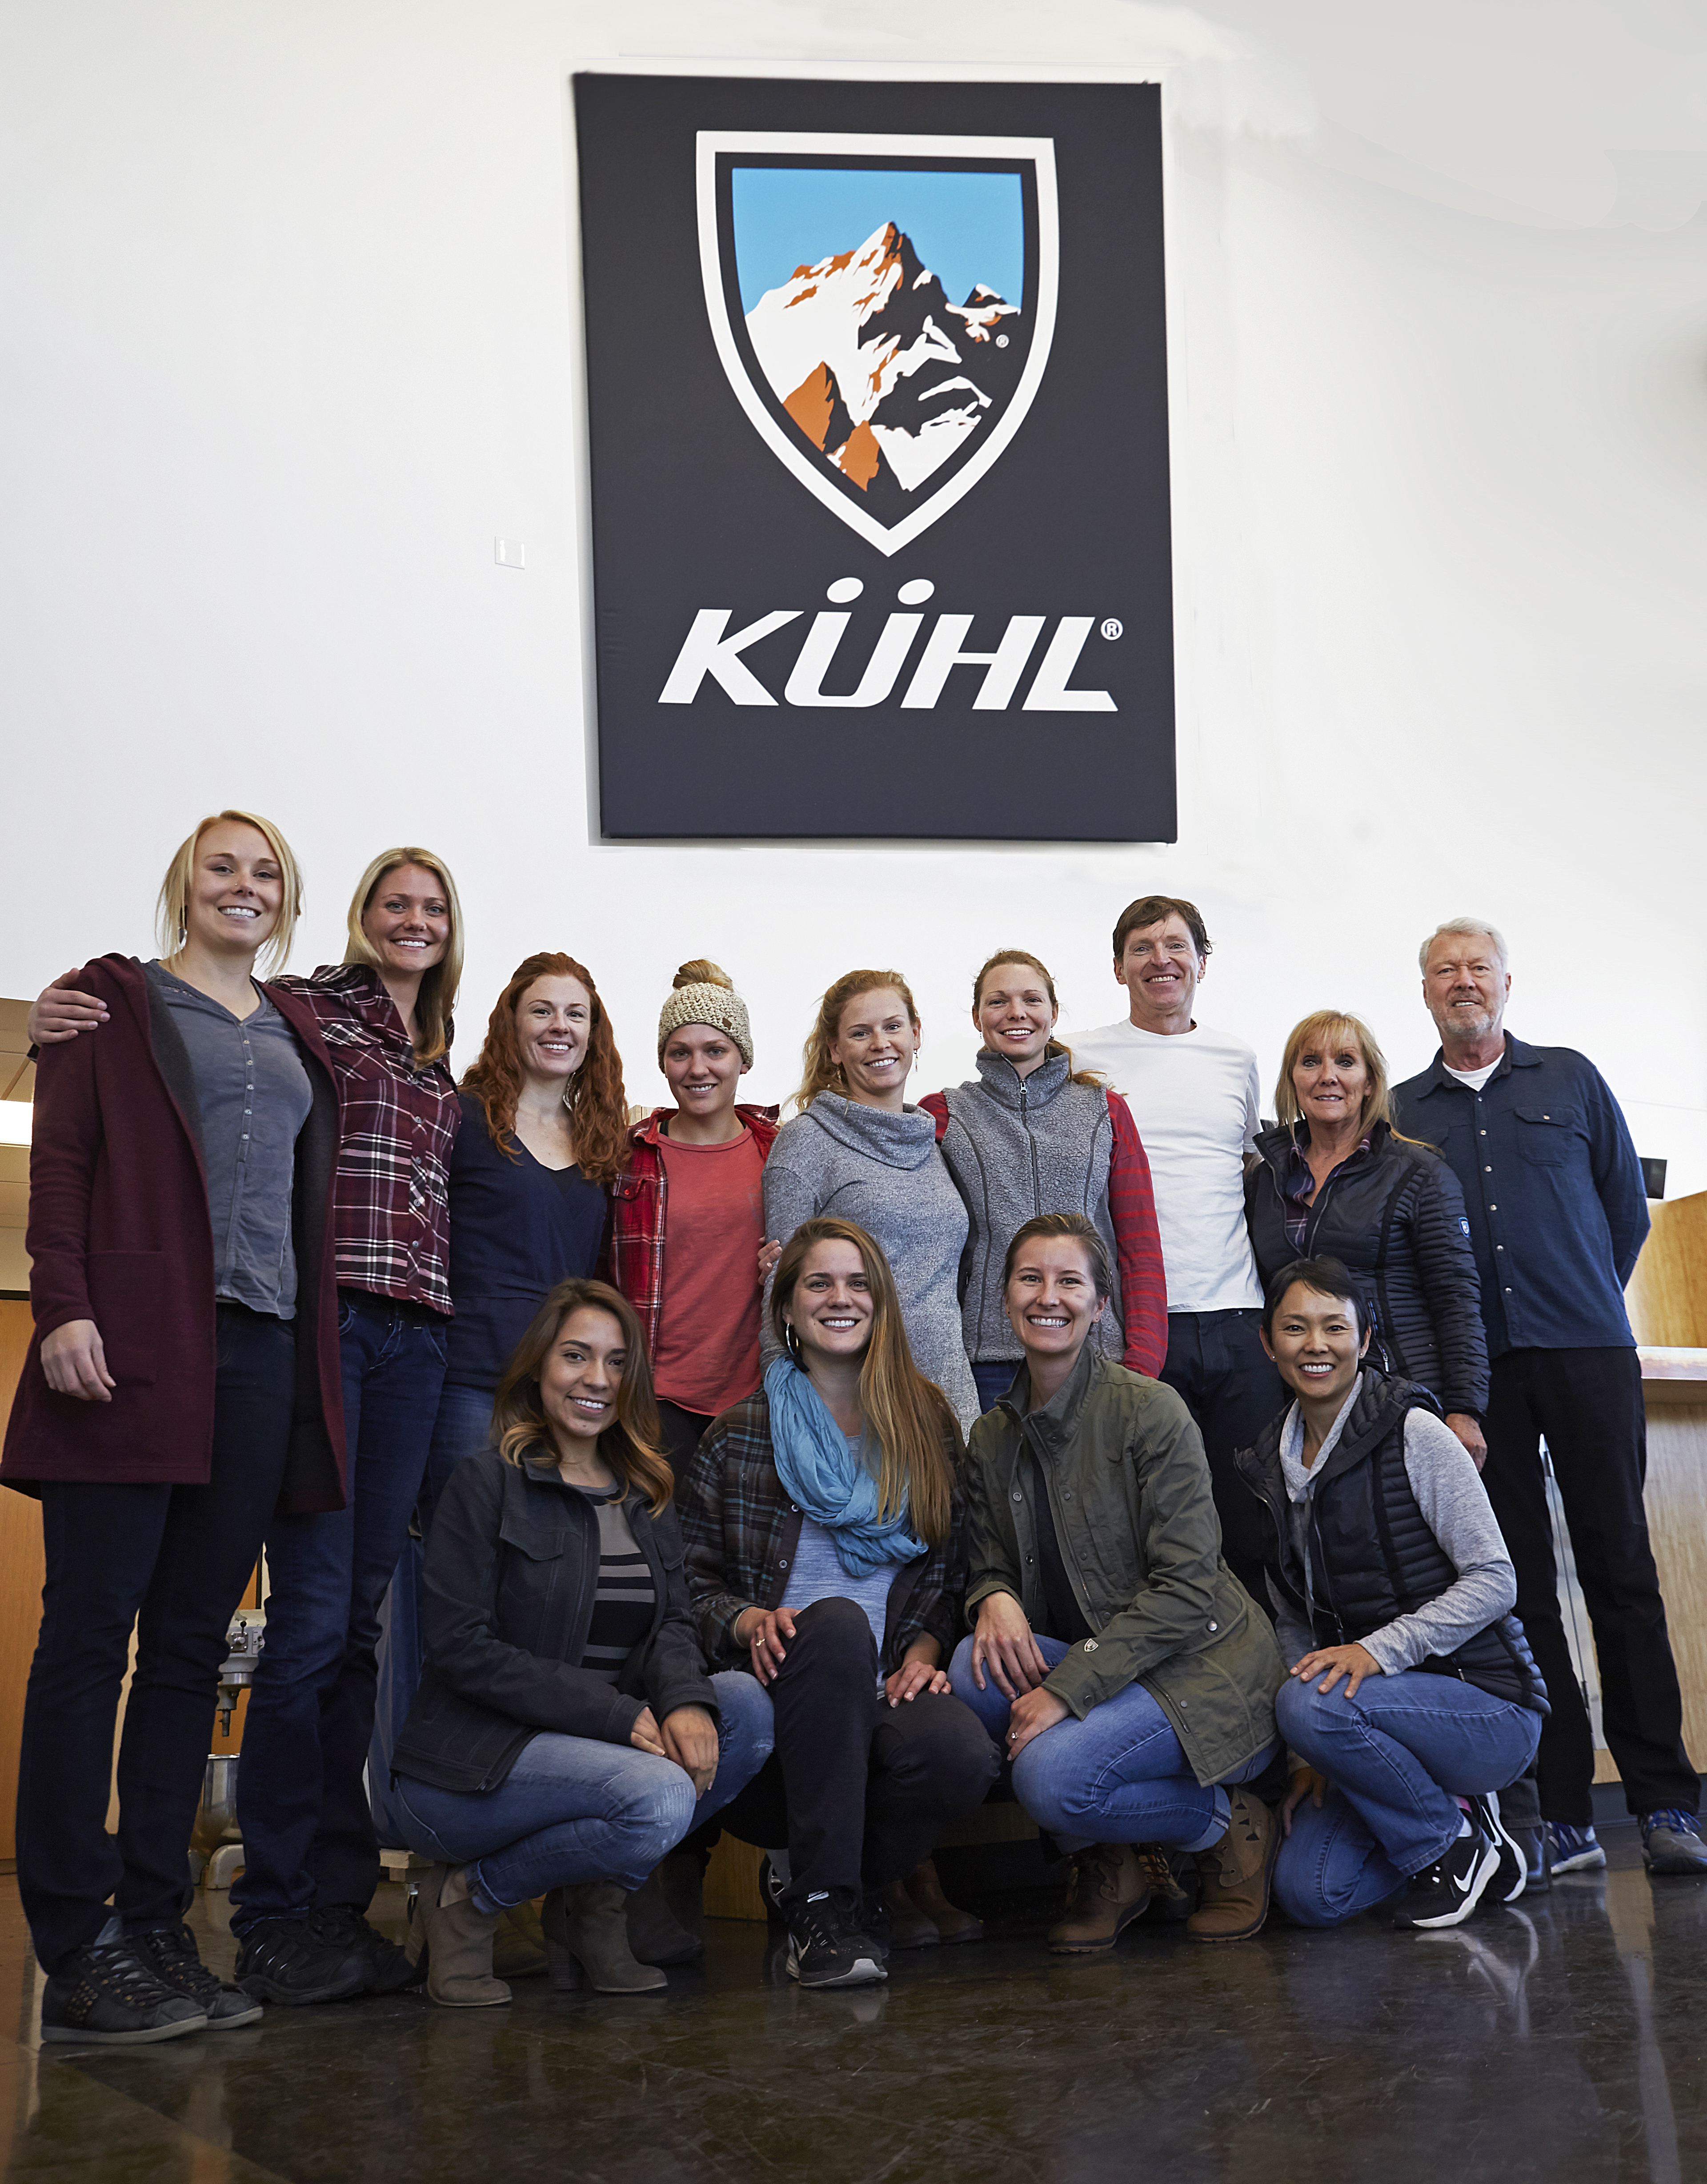 From Ski Bum to Ski Empire: Meet KÜHL founder Kevin Boyle and his amazing team